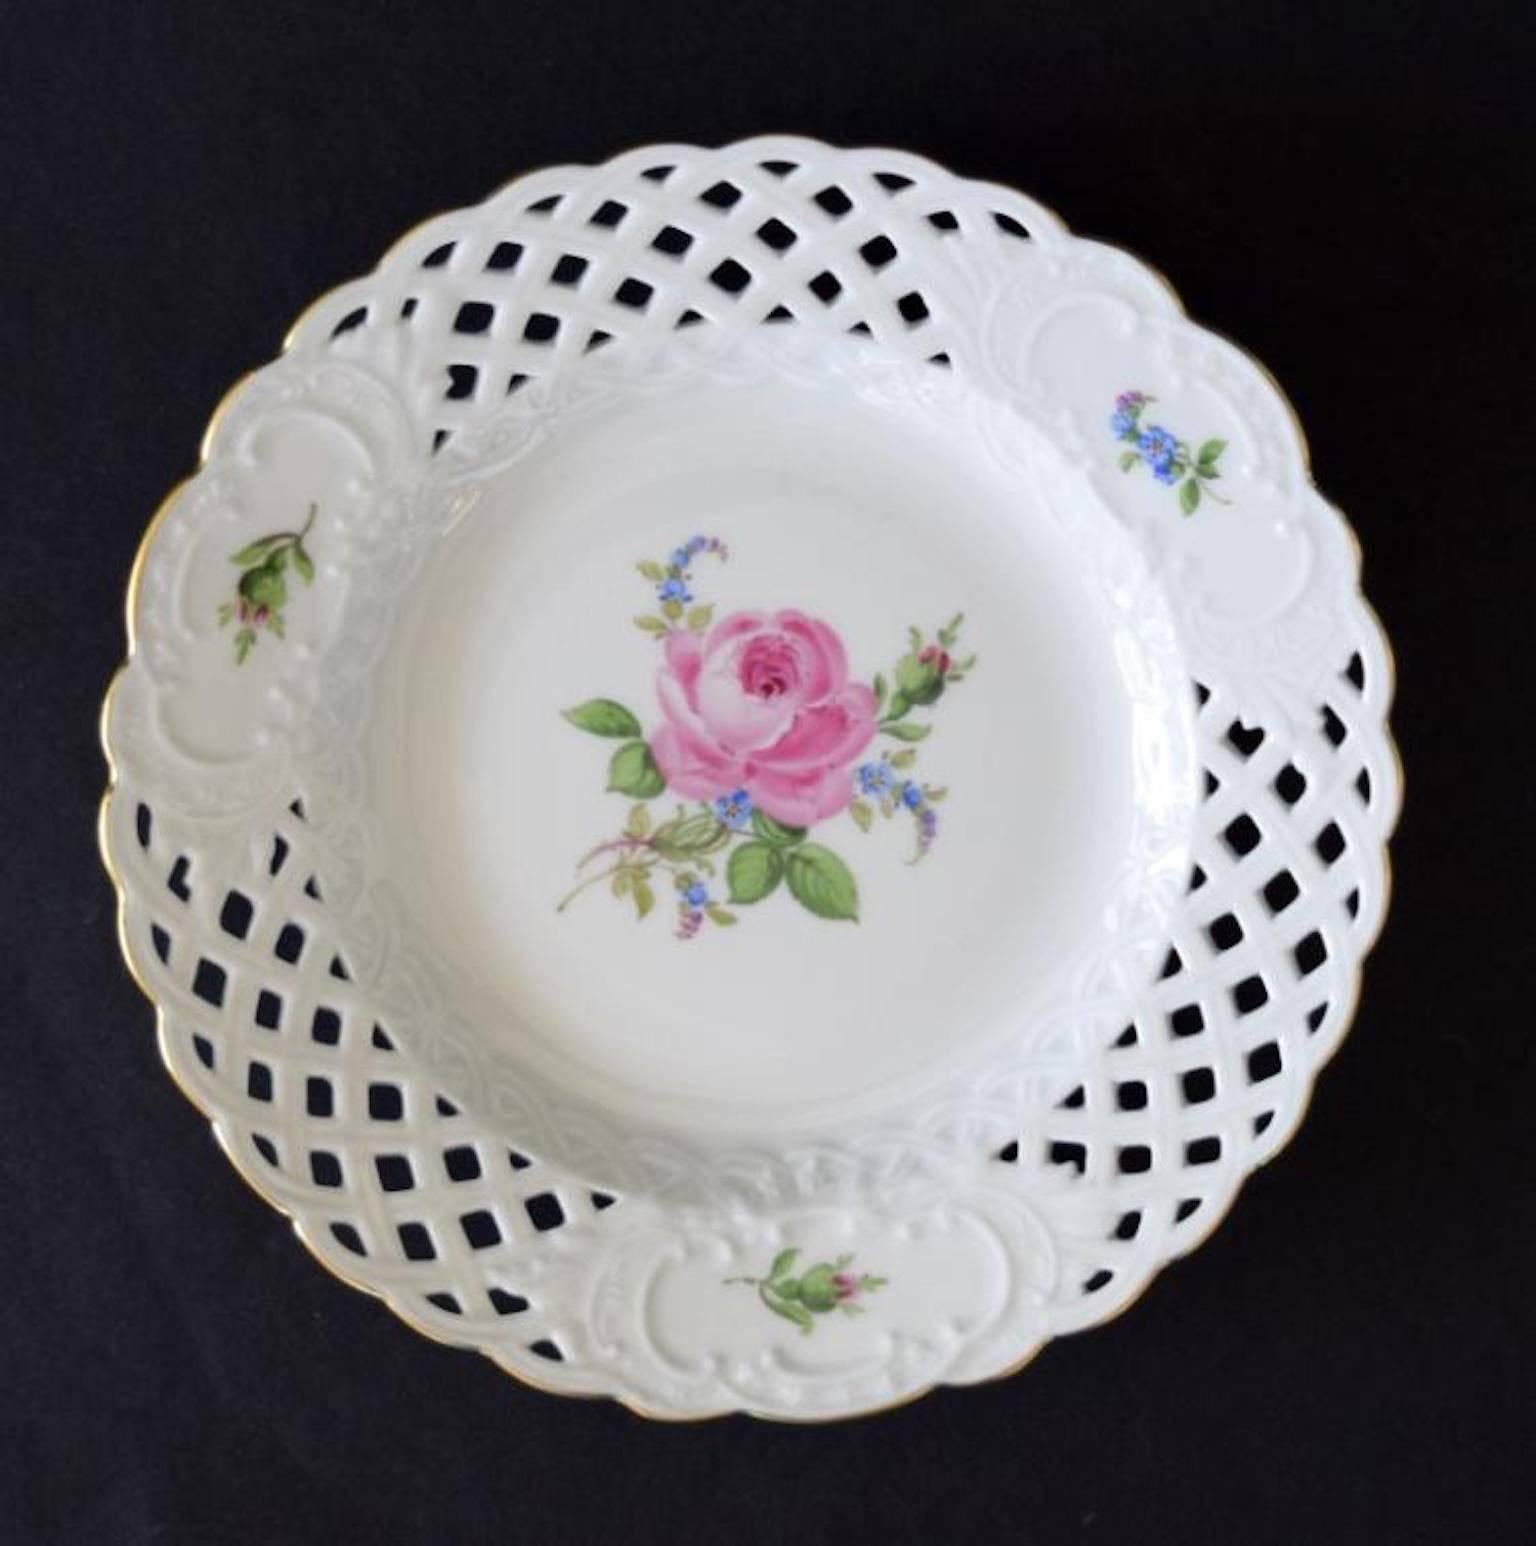 This gilt-rimmed plate features a central pink rose design surrounded with rosebuds and small blue flowers. This piece of porcelain was made by Meissen in a reticulated or woven pattern and is marked 020810 on the base. It is 6" in diameter.